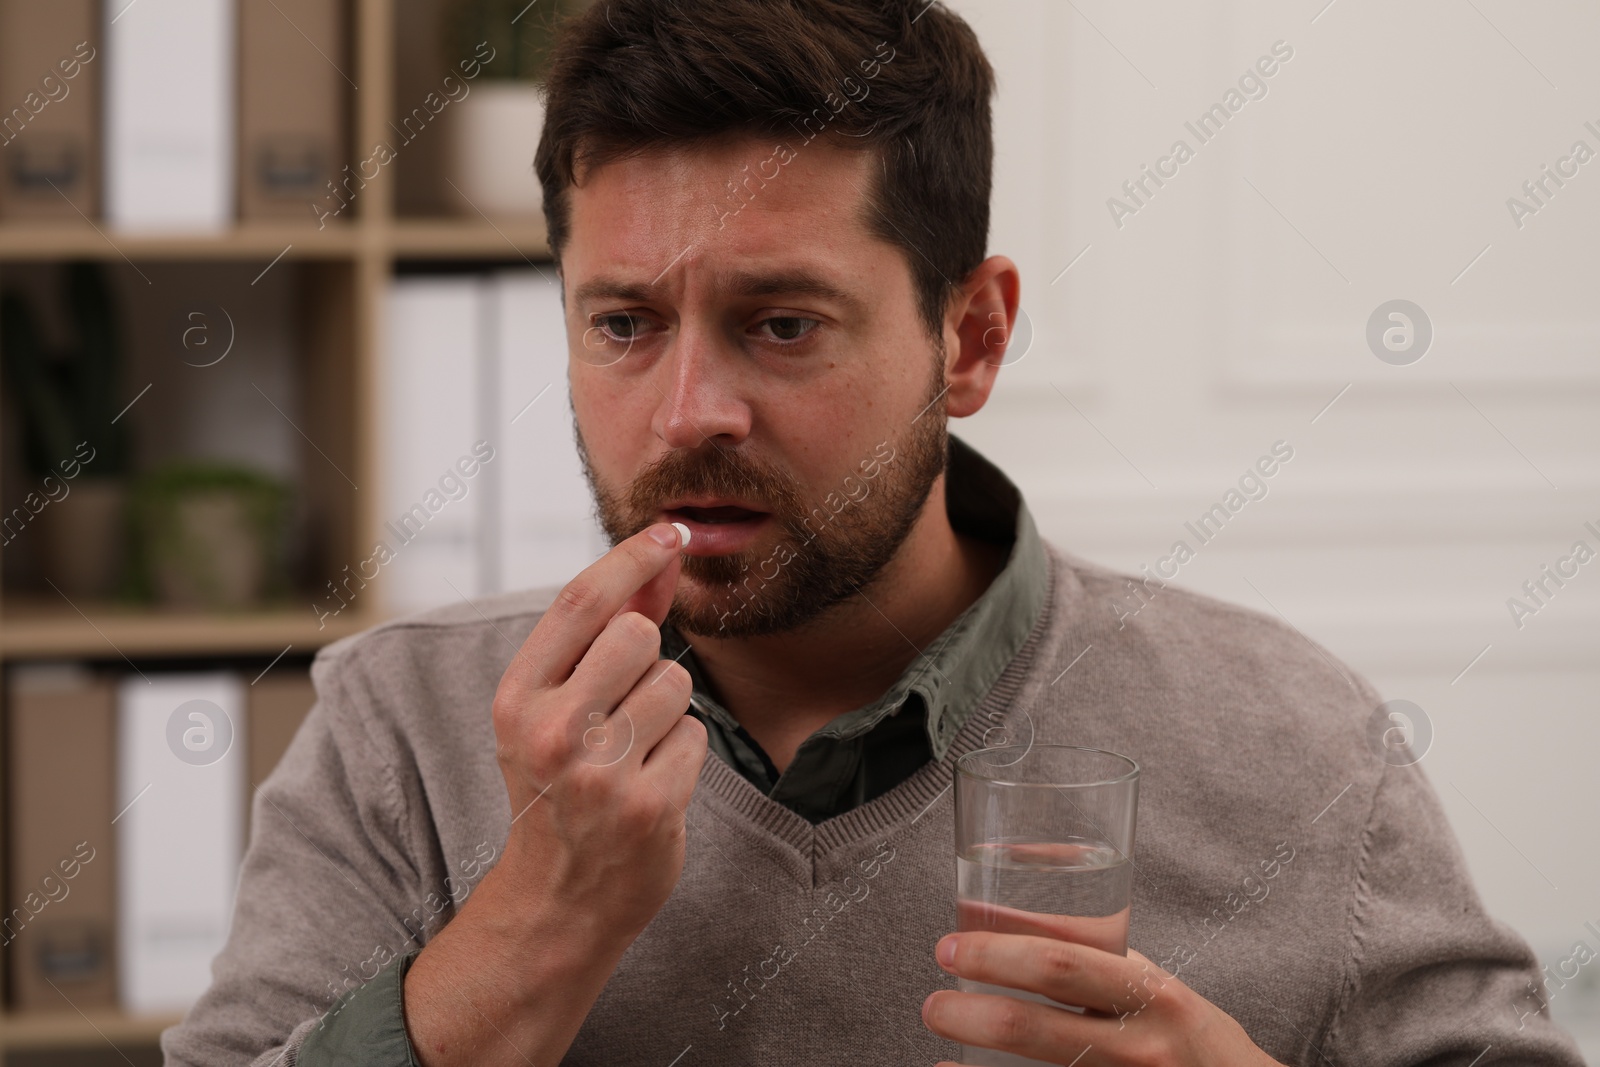 Photo of Depressed man with glass of water taking antidepressant pill on blurred background